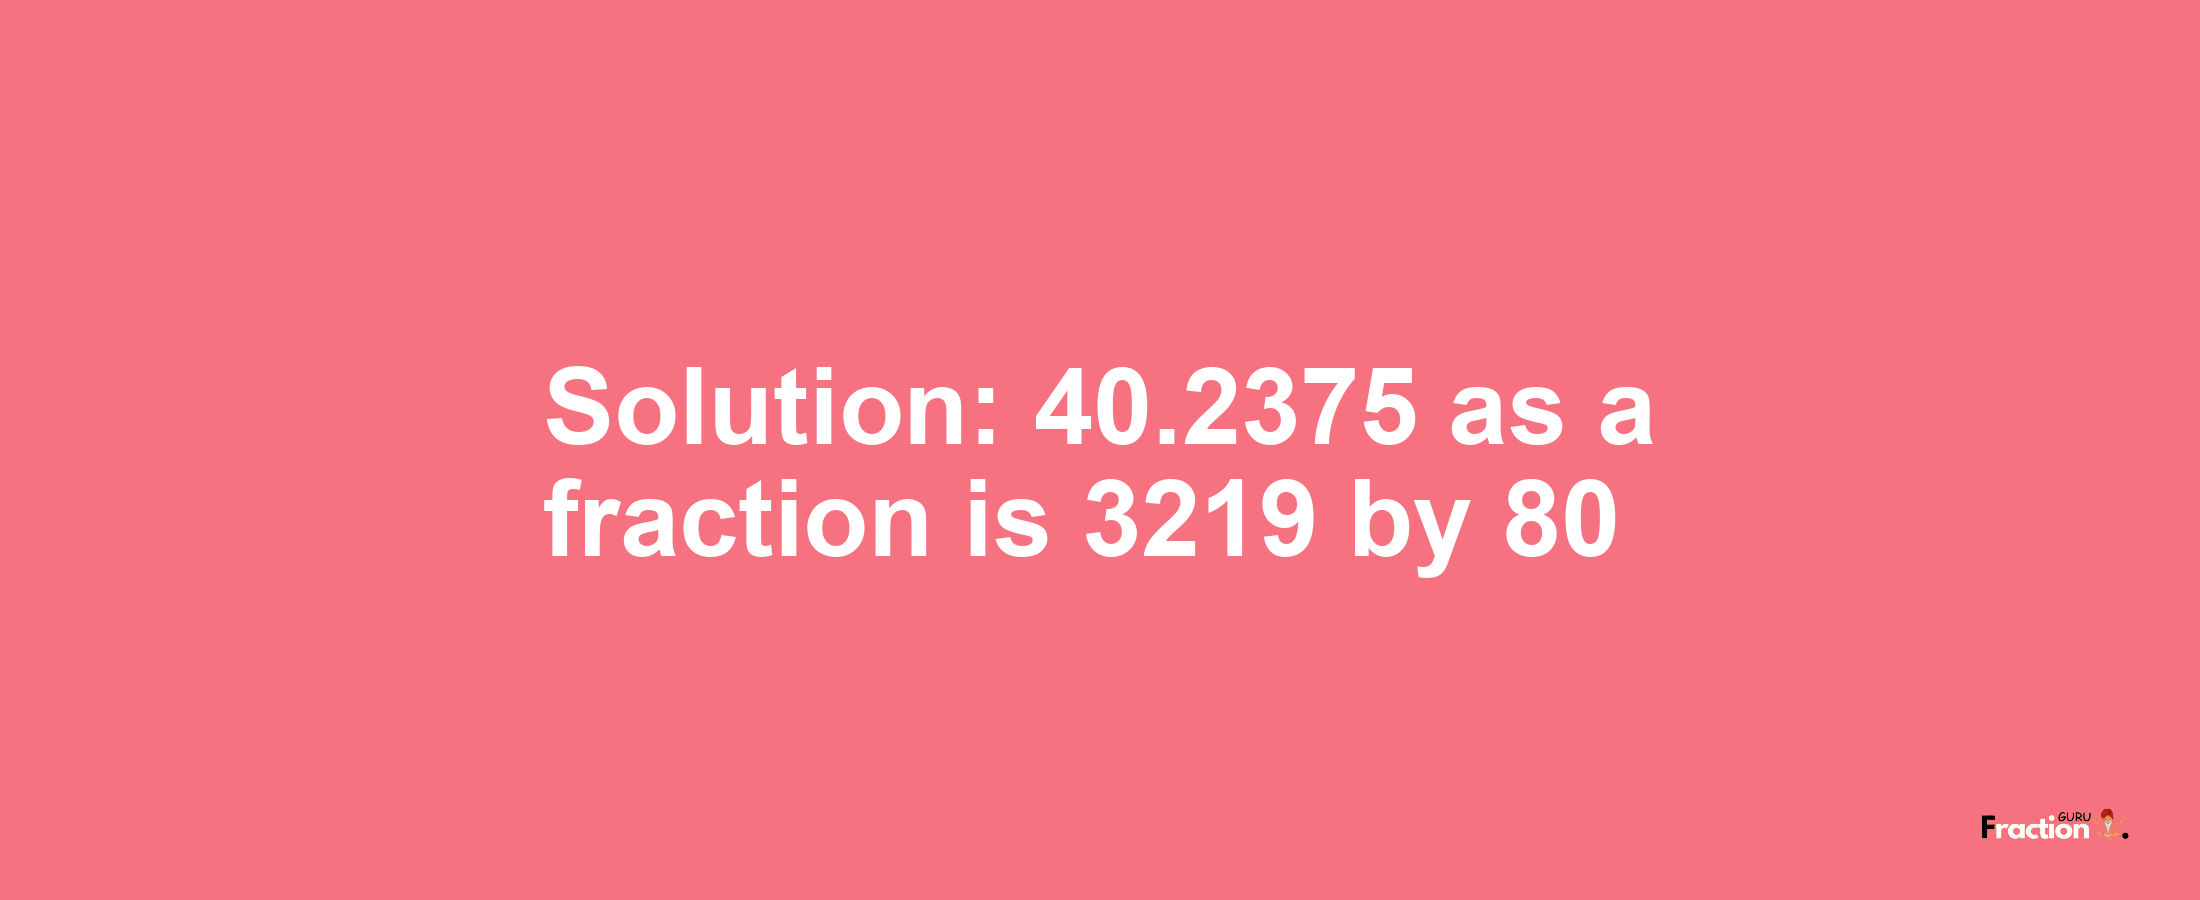 Solution:40.2375 as a fraction is 3219/80